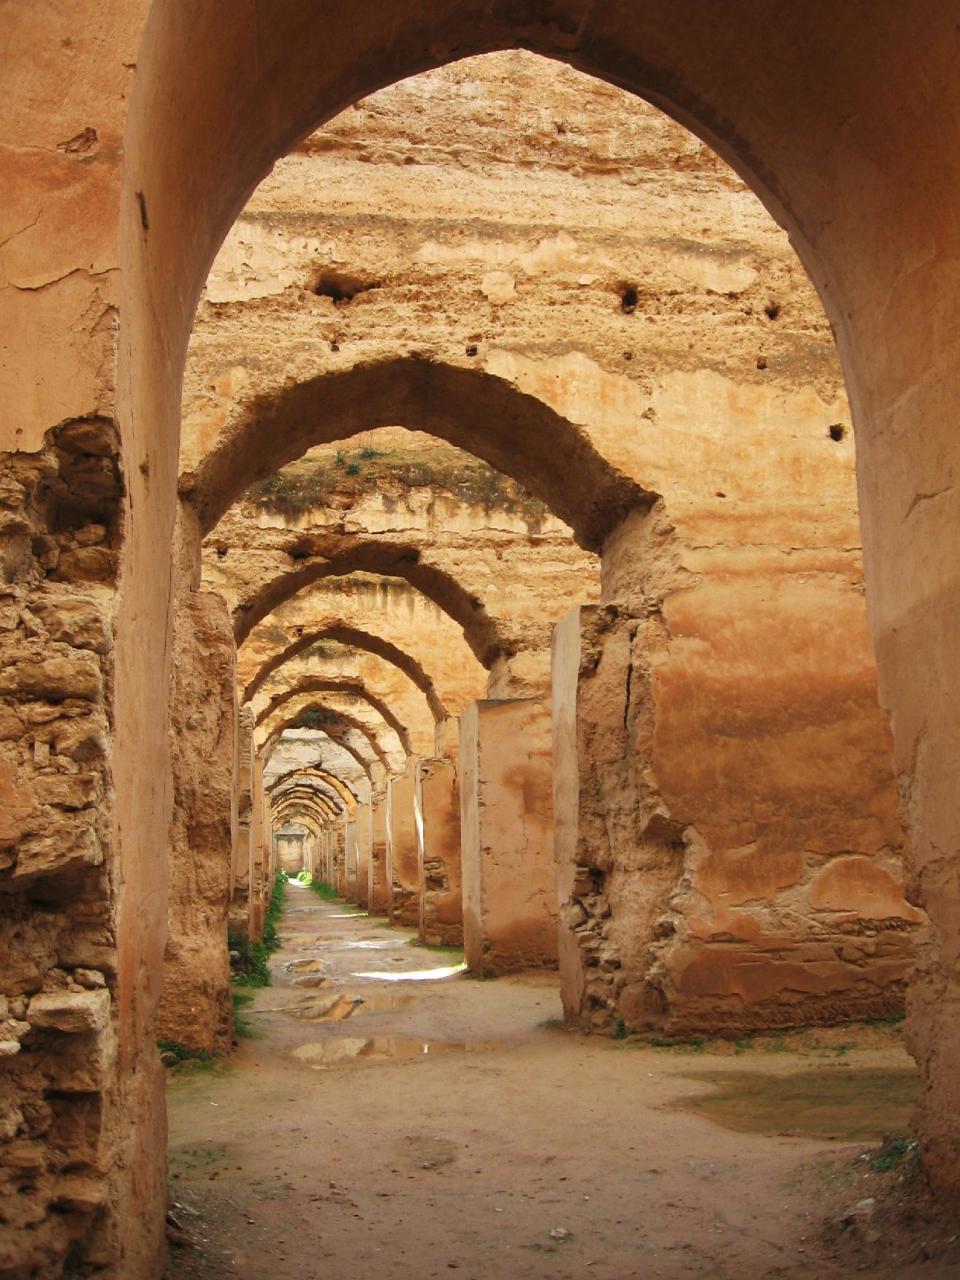 This January 2013 photo shows the ruins of the gigantic late 17th-century royal stables in Meknes, one of Morocco's former imperial capitals. With tourists thronging the shops in the city's medina, historical monuments can sometimes seem eerily empty. (AP Photo/Giovanna Dell'Orto)